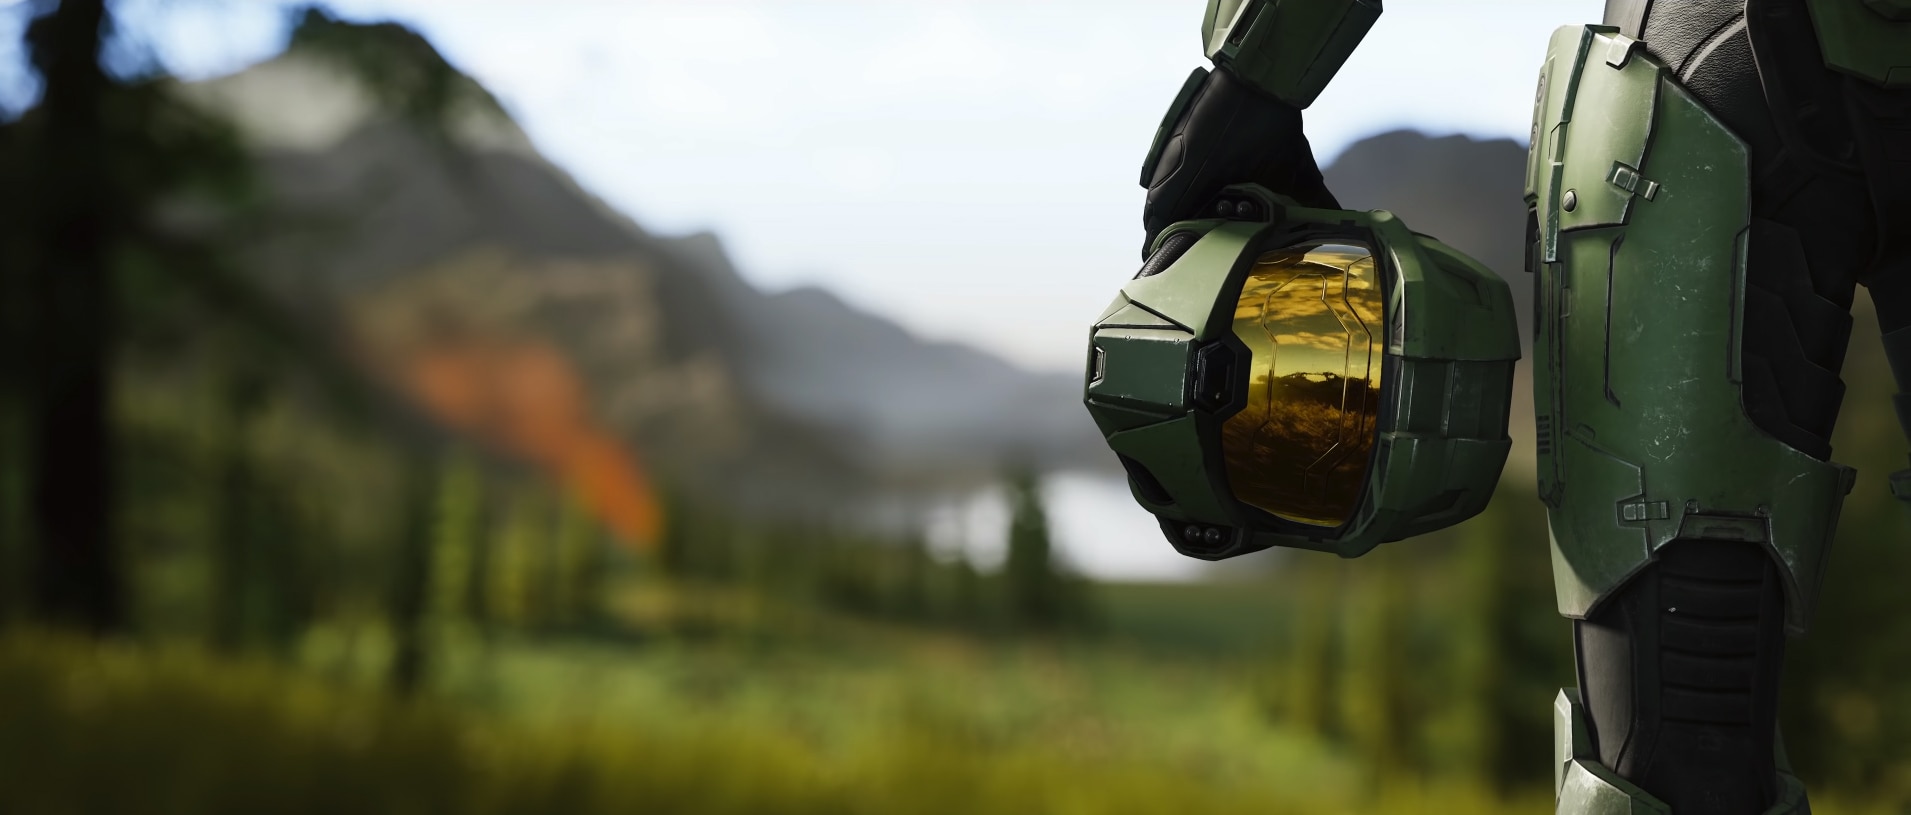 Halo Infinite Multiplayer Beta is Live Now on Xbox and PC